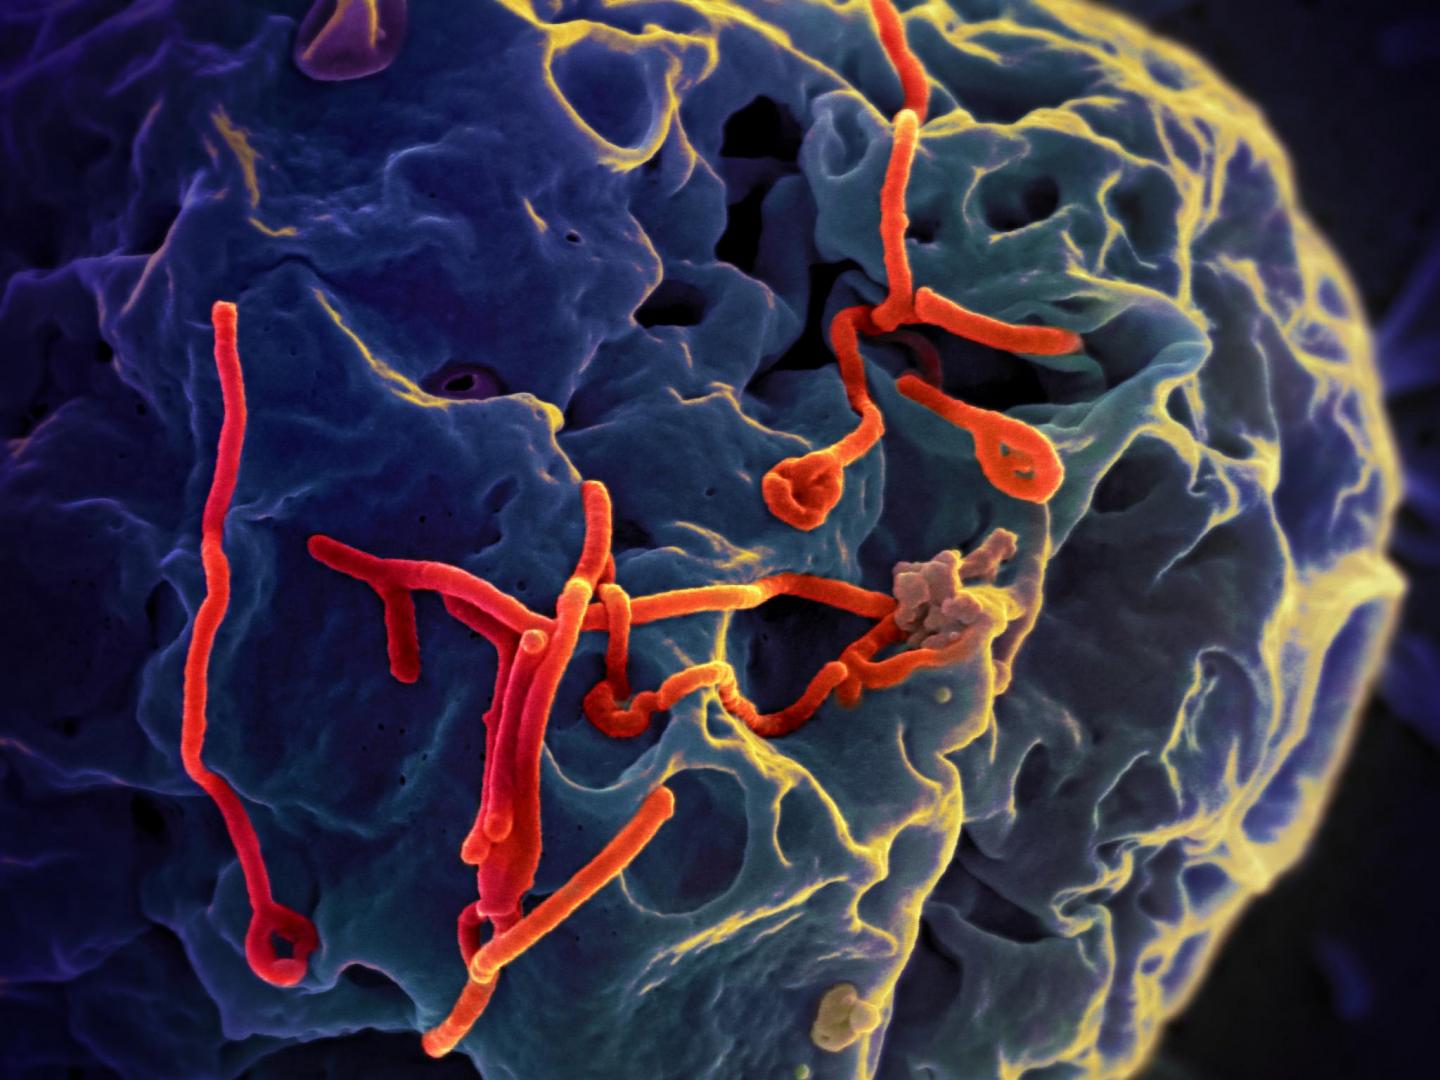 Ebola Virus on the Attack